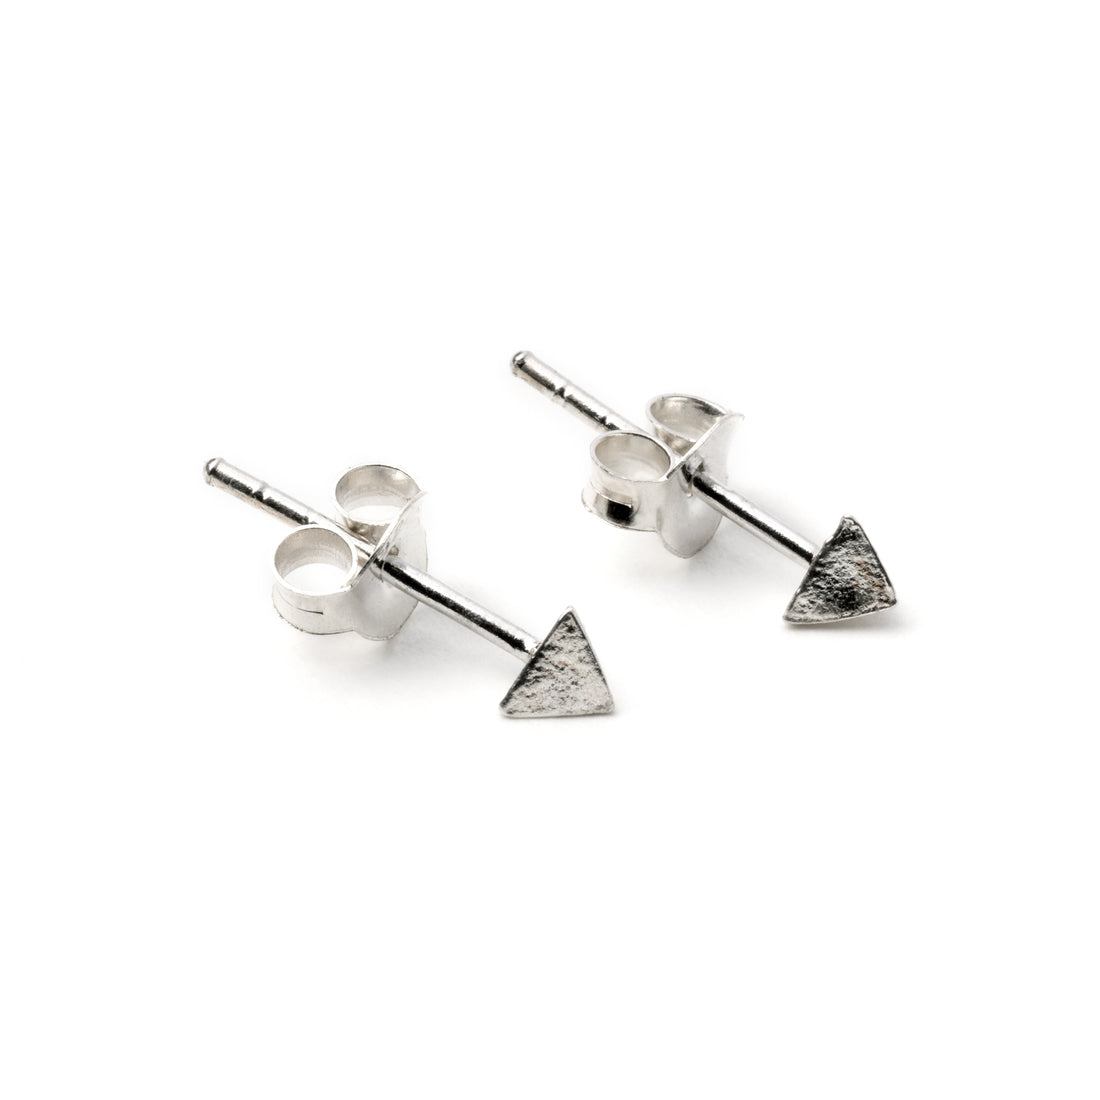 pair of Silver Pyramid stud earrings right side view